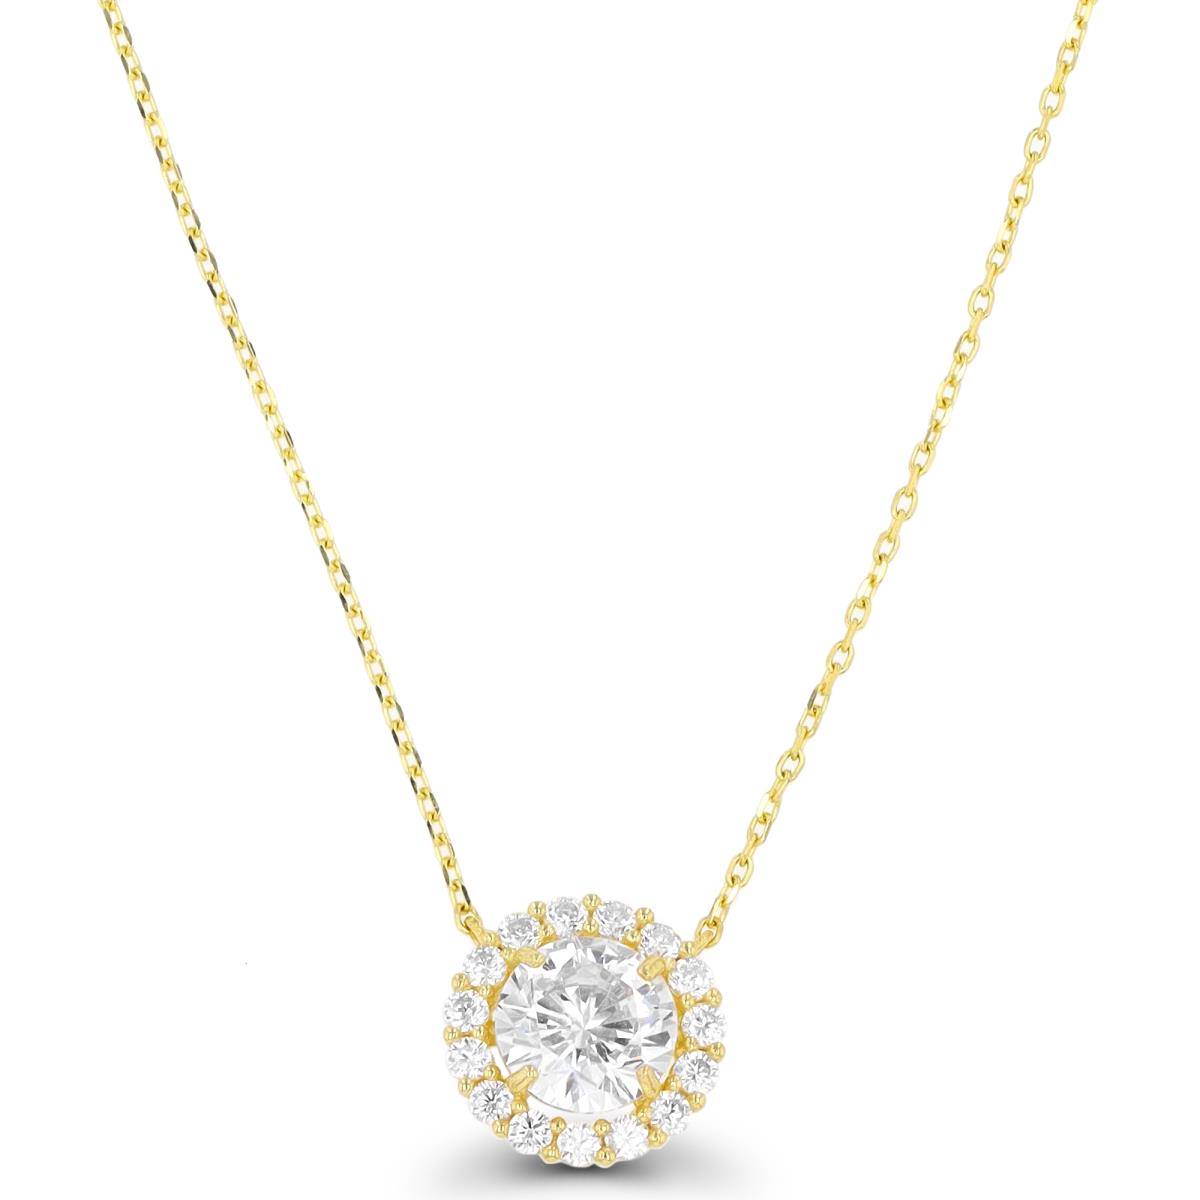 10K Yellow Gold 6mm Round CZ Halo 16"+2" Necklace